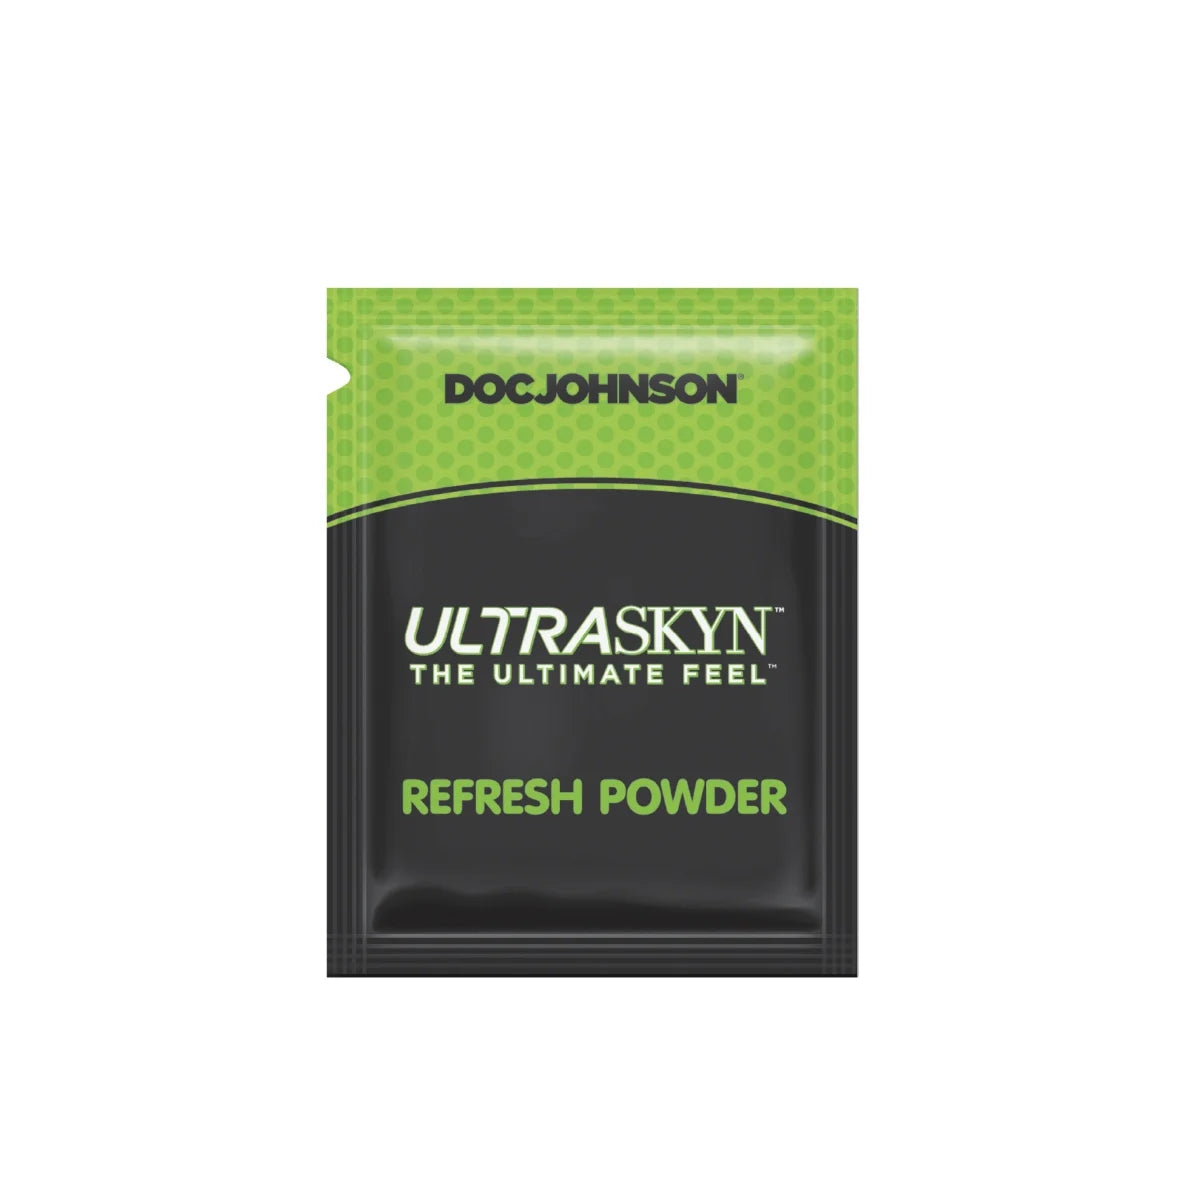 a packet of ultraskin refresh powder on a white background